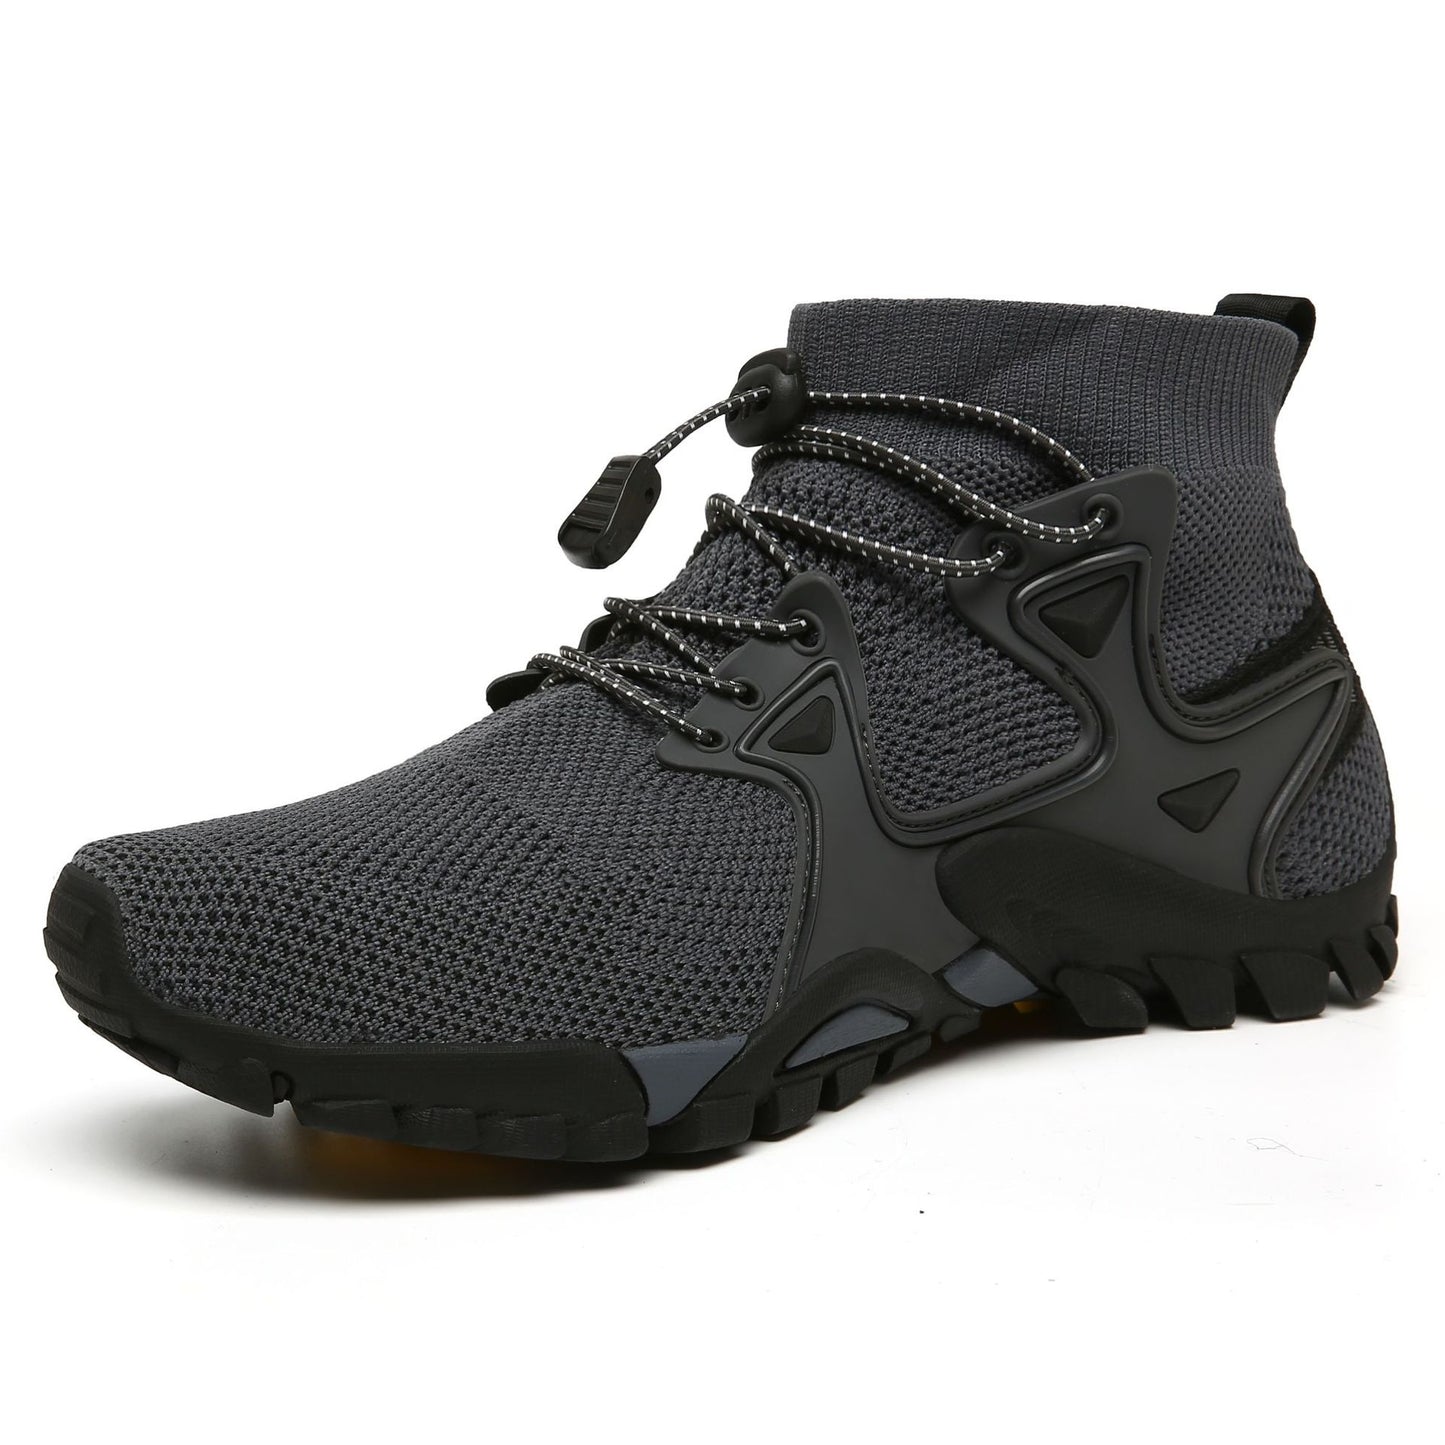 Men's Tactical Outdoor Hiking Trail Shoes